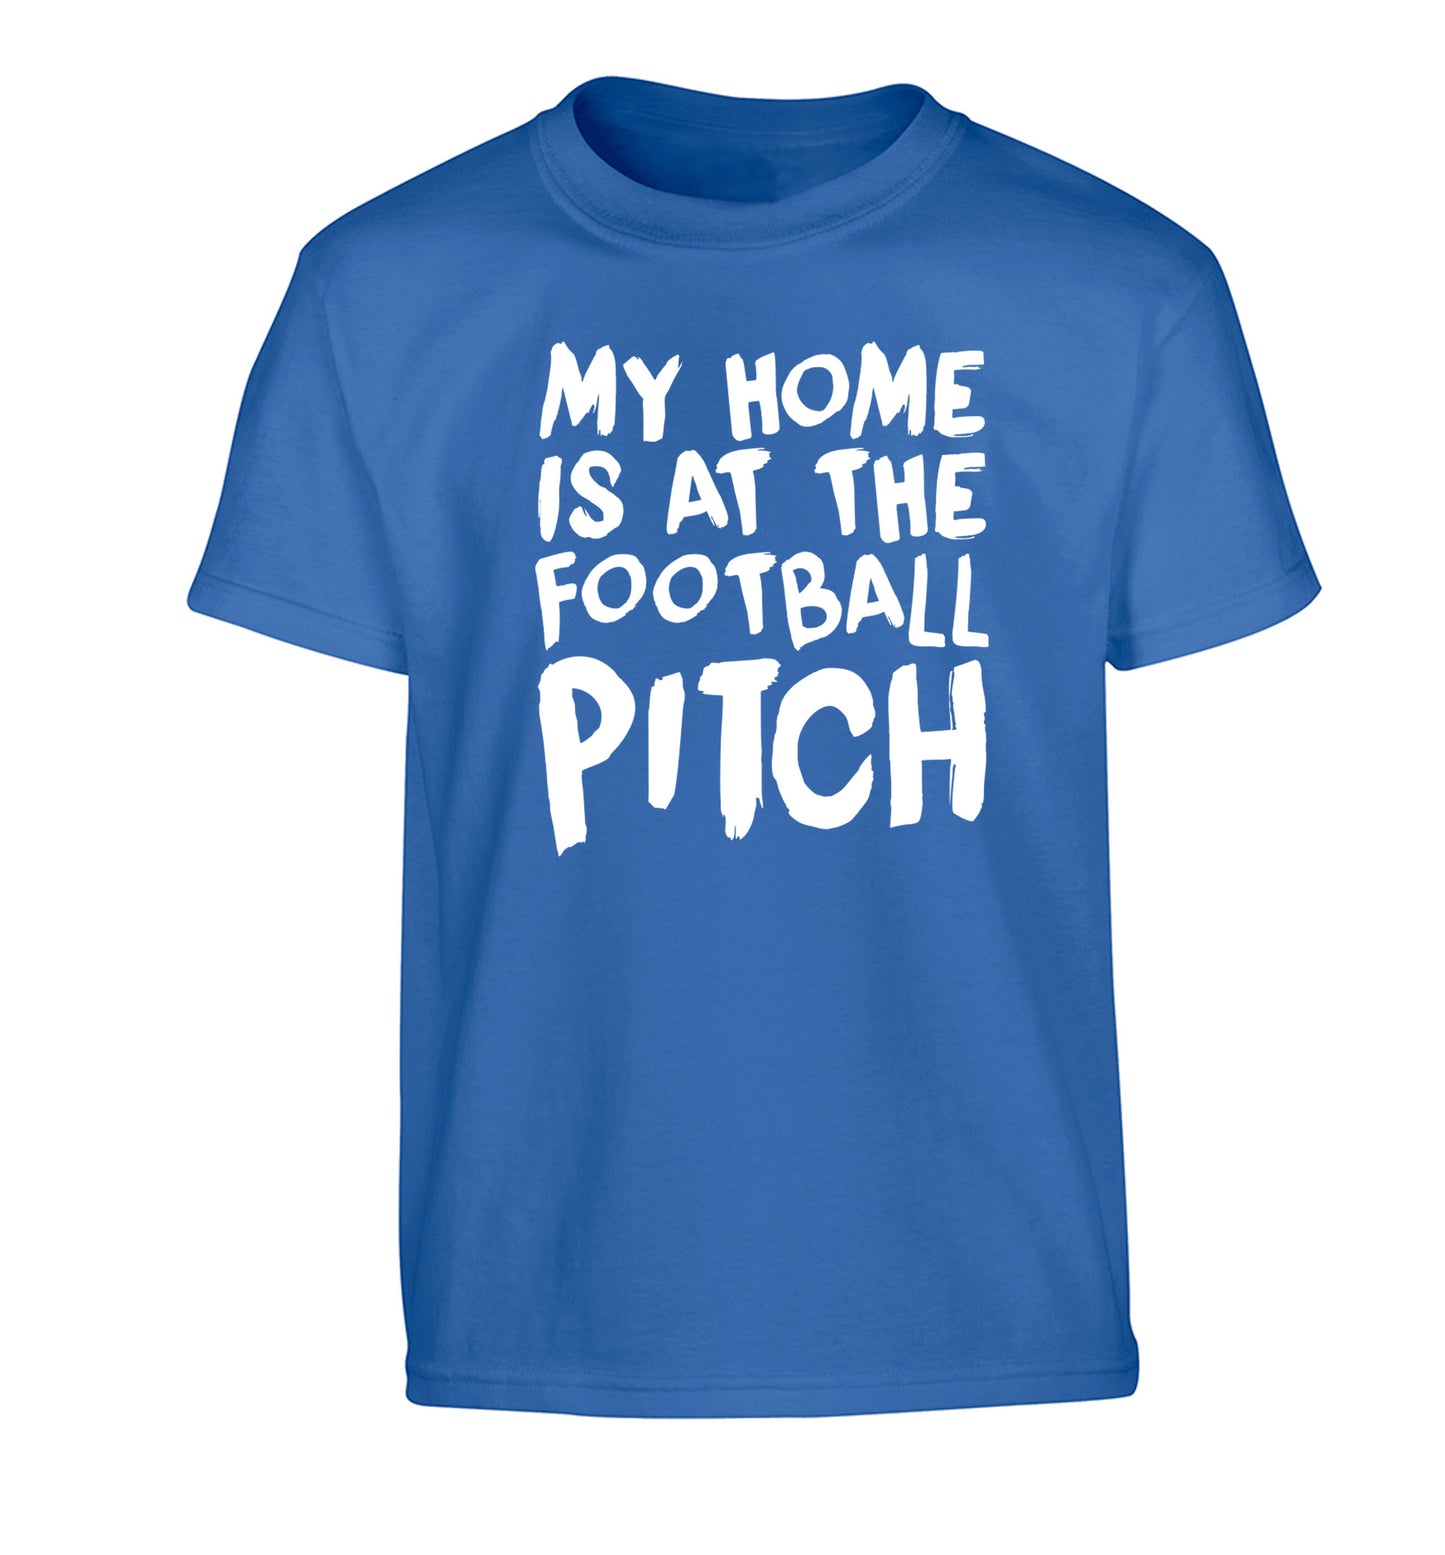 My home is at the football pitch Children's blue Tshirt 12-14 Years